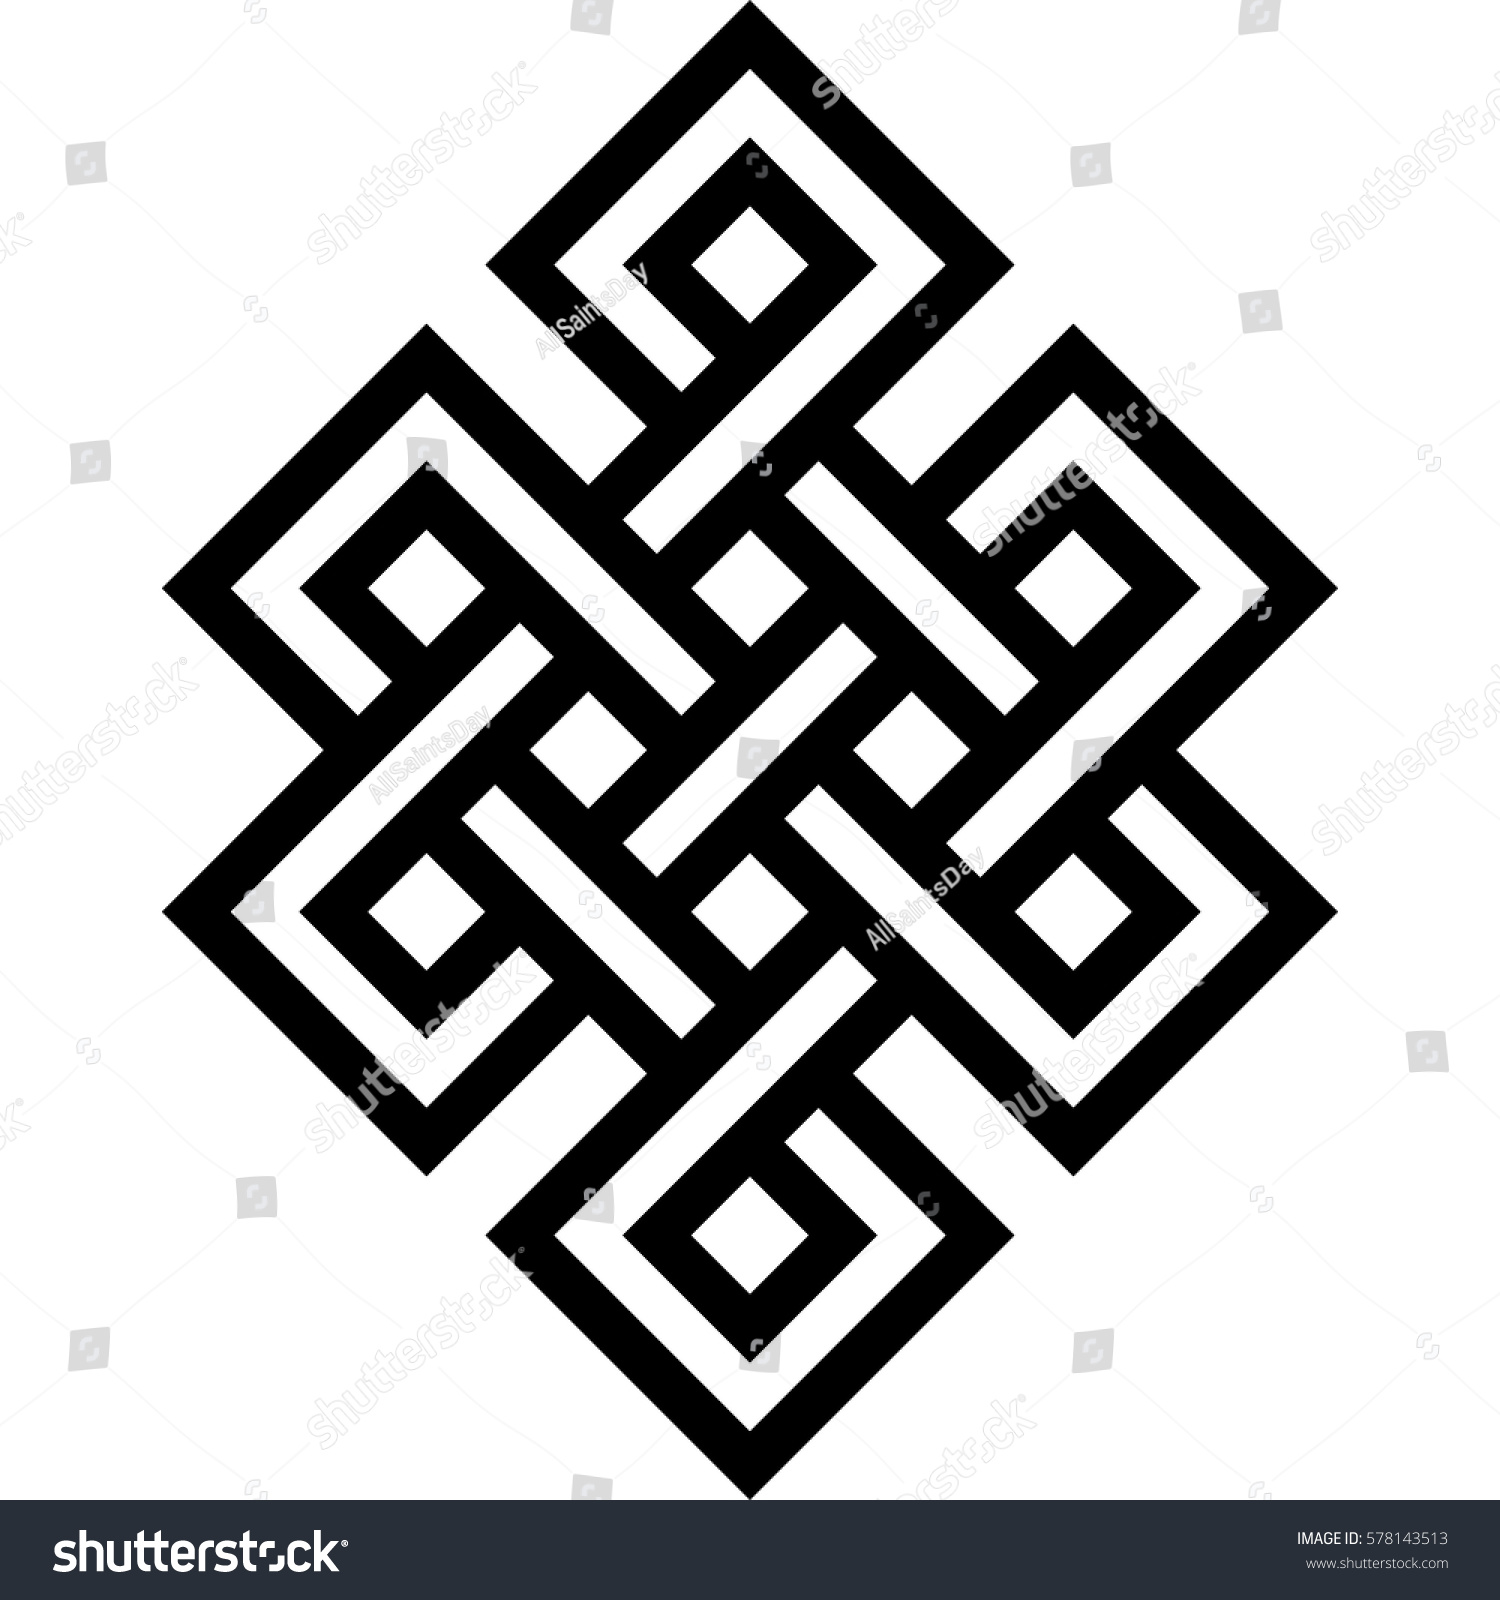 stock-vector-celtic-pattern-element-of-s